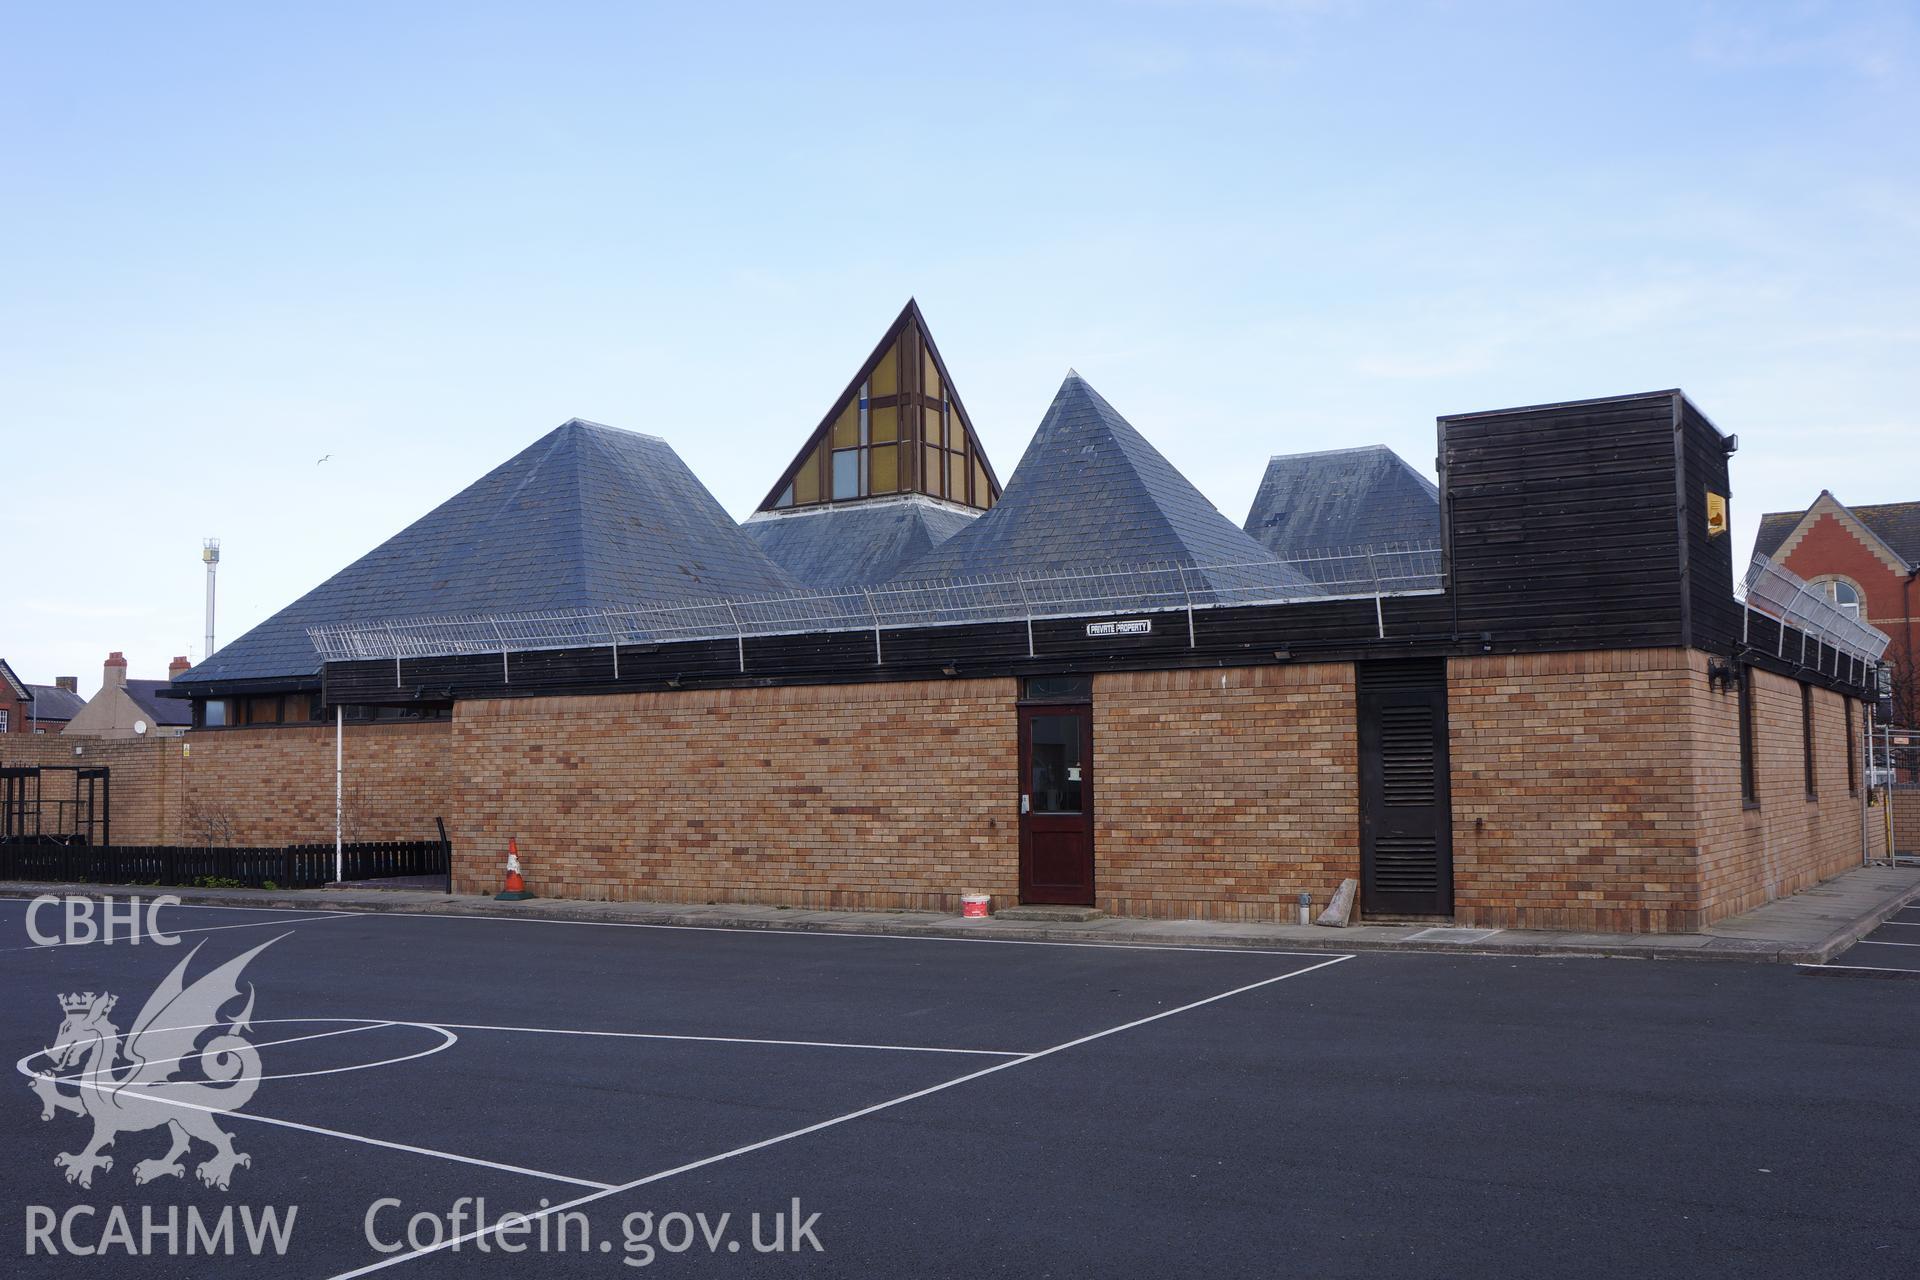 Digital colour photograph showing exterior of Our Lady of the Assumption Catholic church, Rhyl.